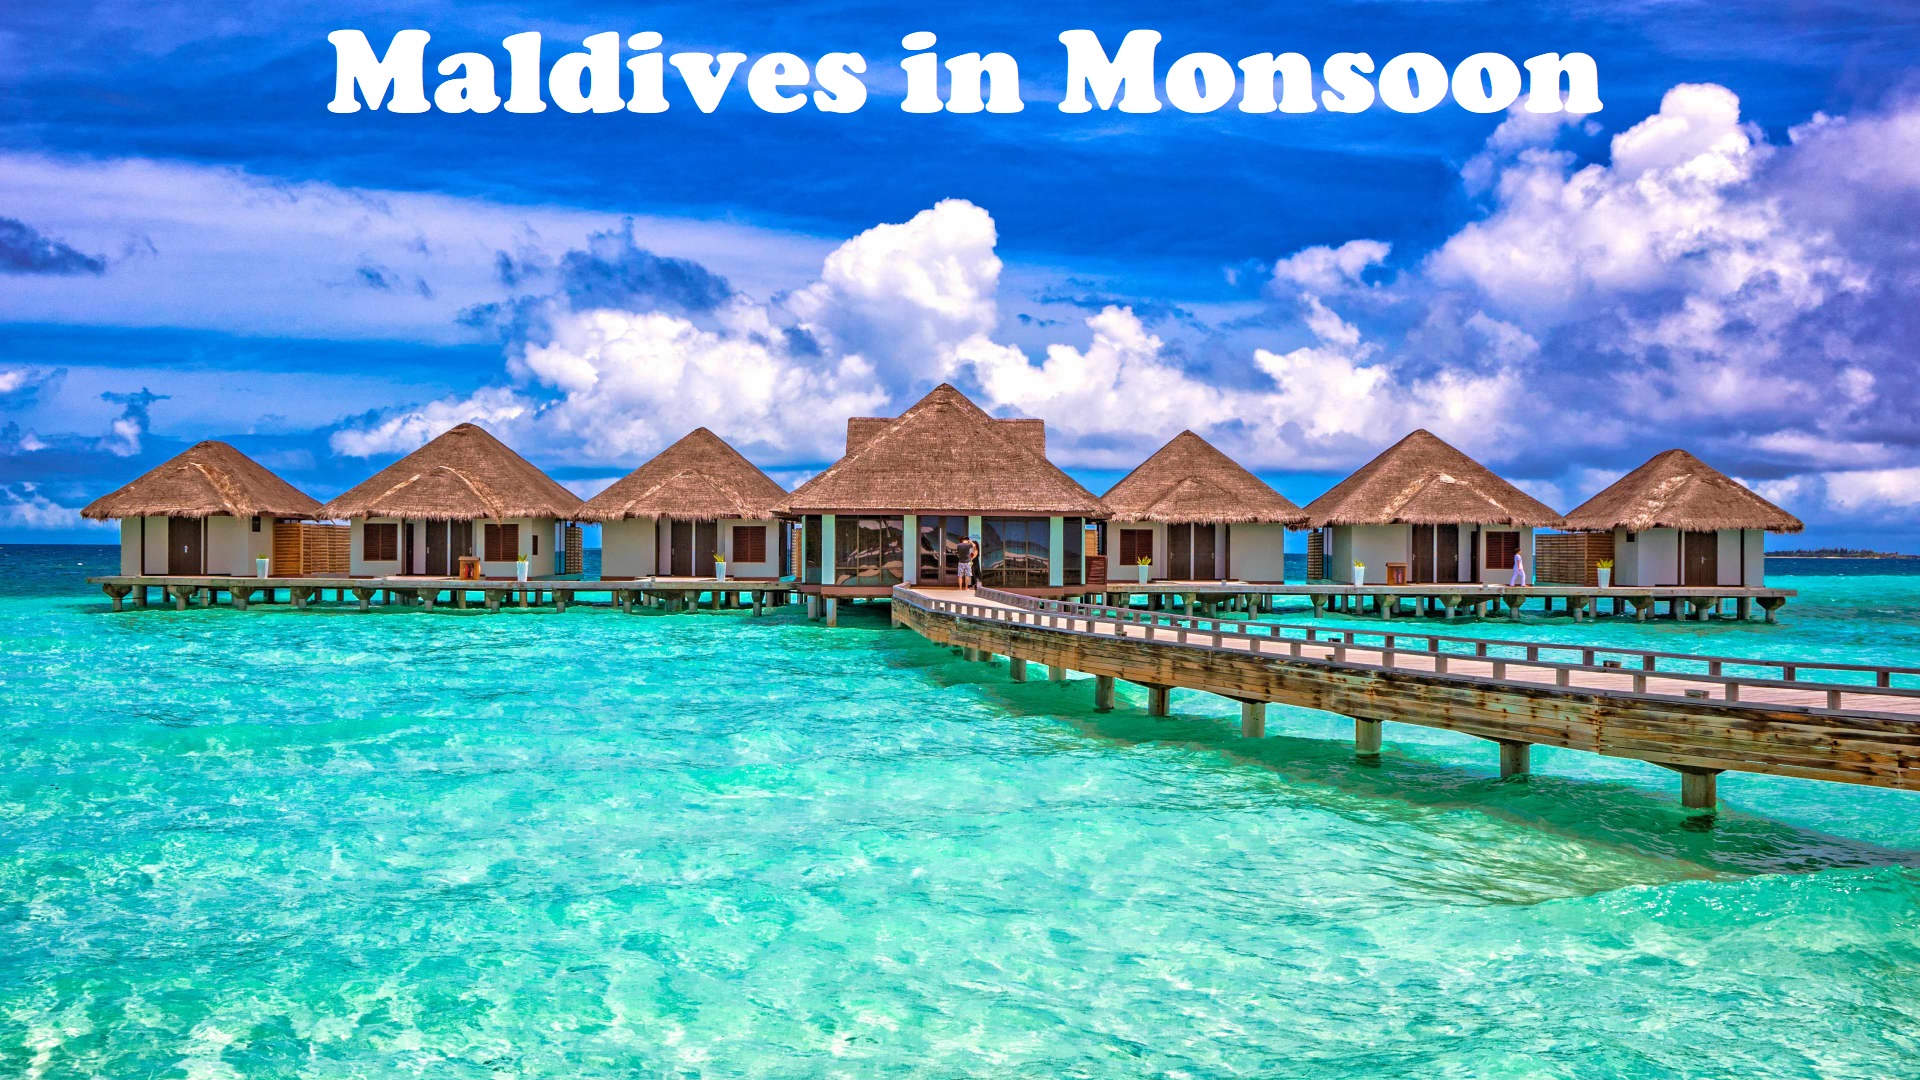 Maldives in Monsoon Maldives want to travel on a budget, and monsoon